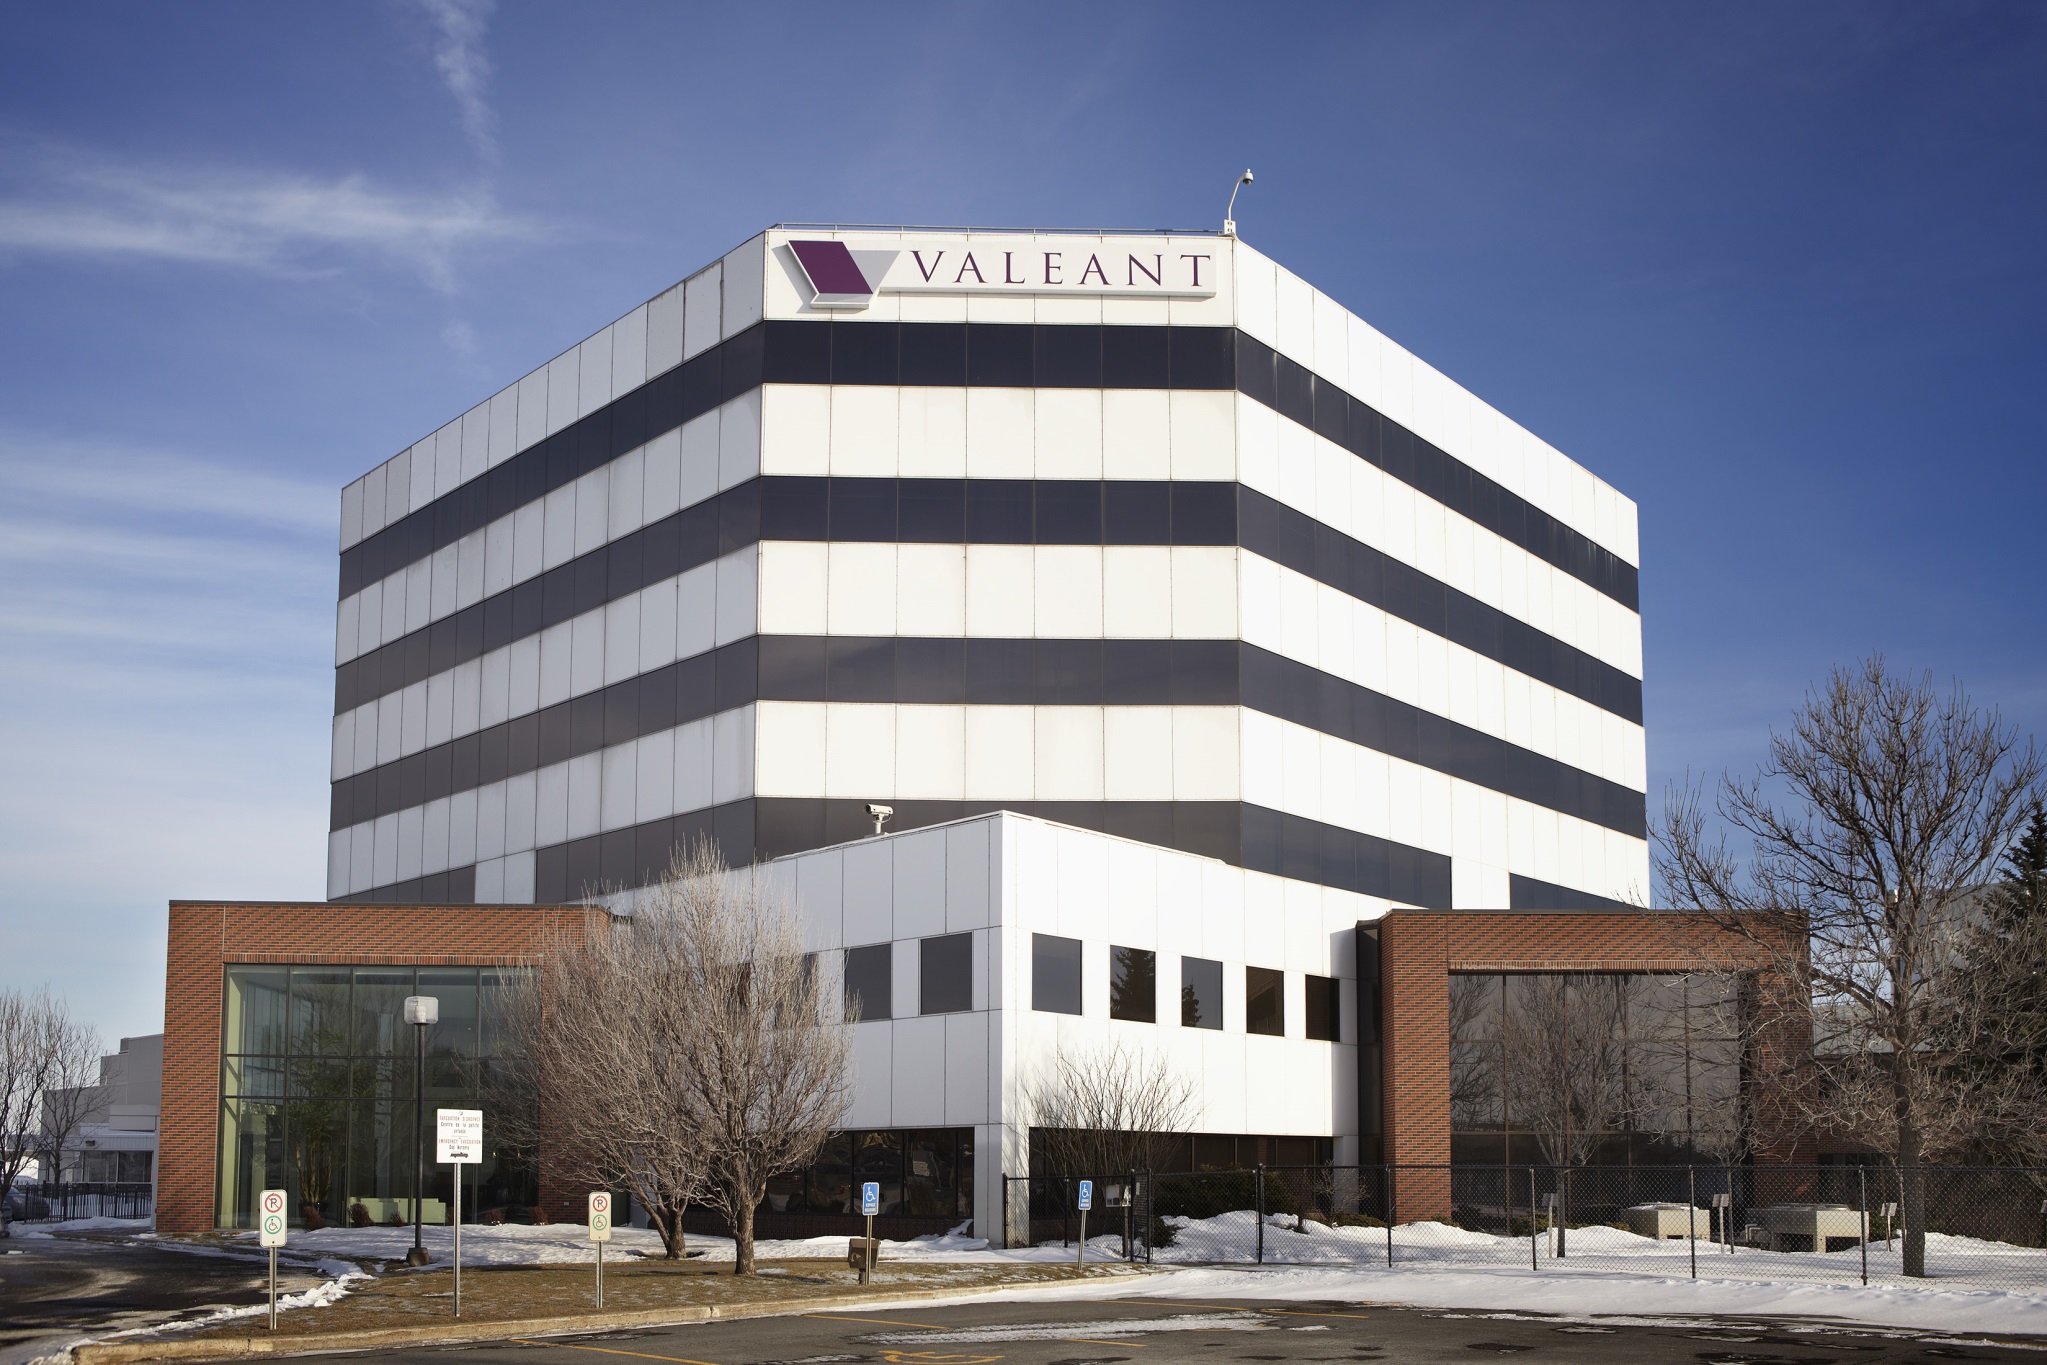 Valeant’s controversial model undergoing changes, says CEO